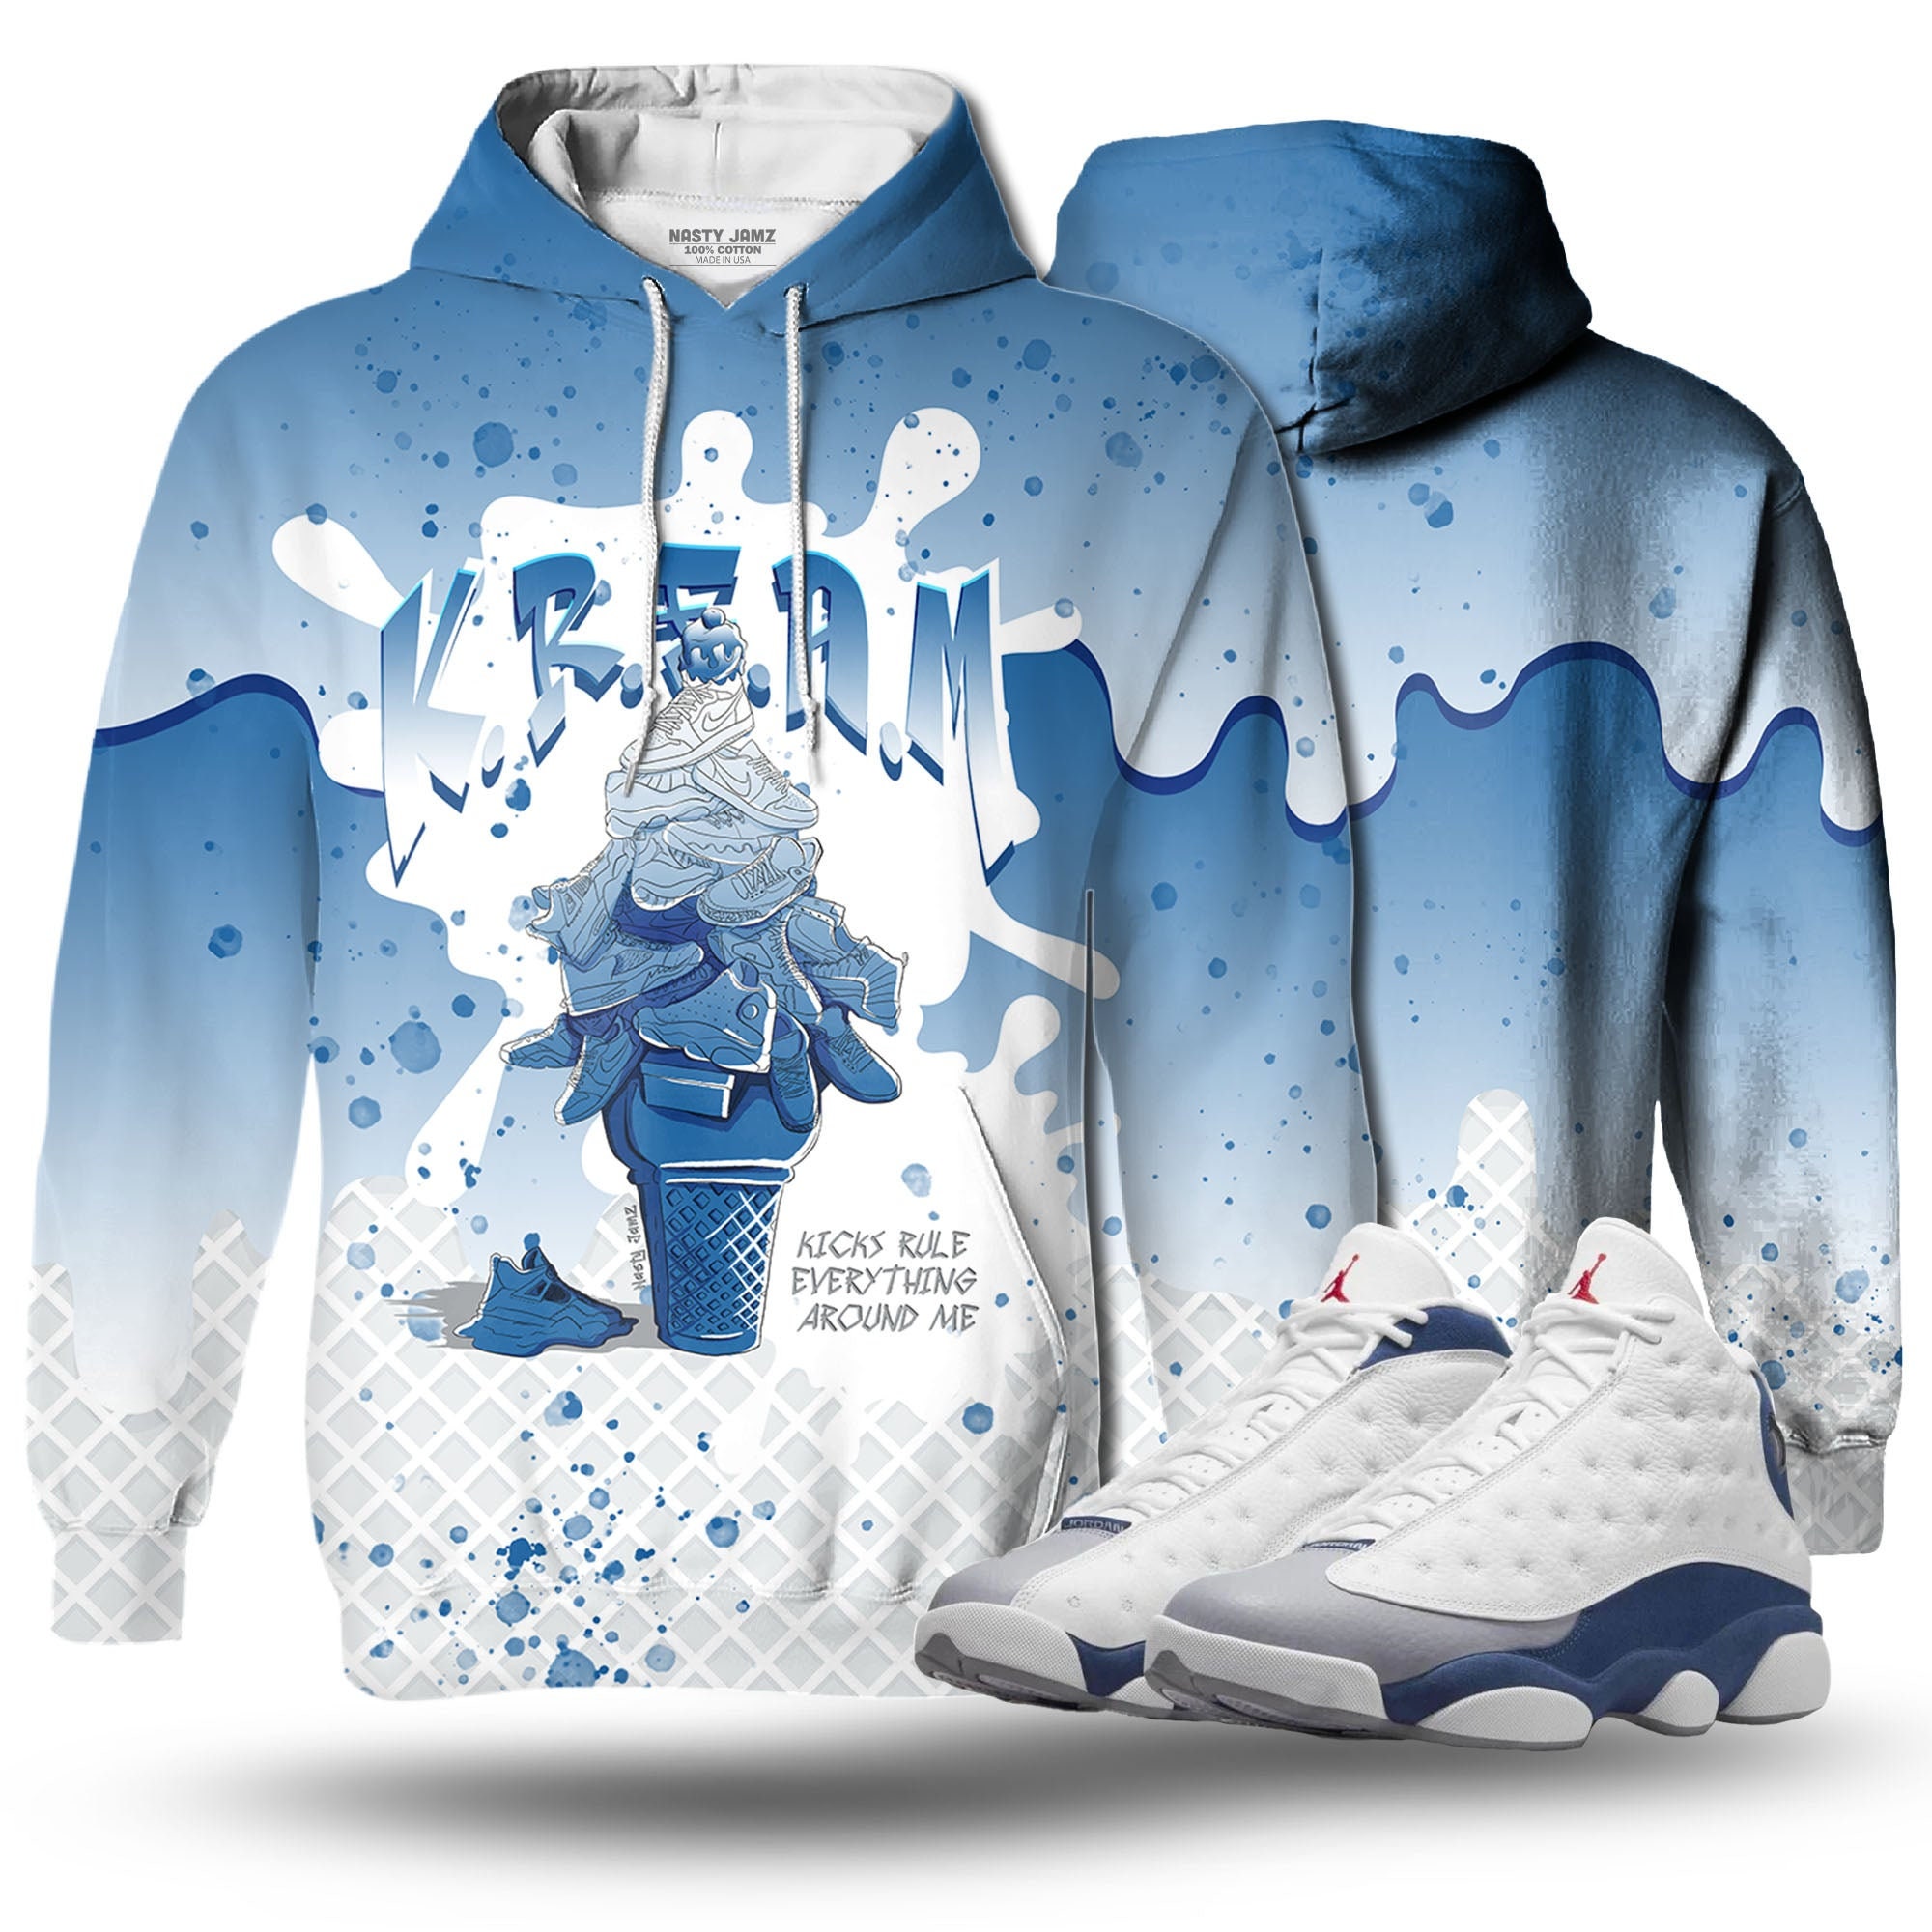 Discover KREAM 3D Waffle Cone Unisex matching Hoodie Jordan 13 Retro French Blue outfit match hoodie, oversized hoodie, sneaker match hoodie